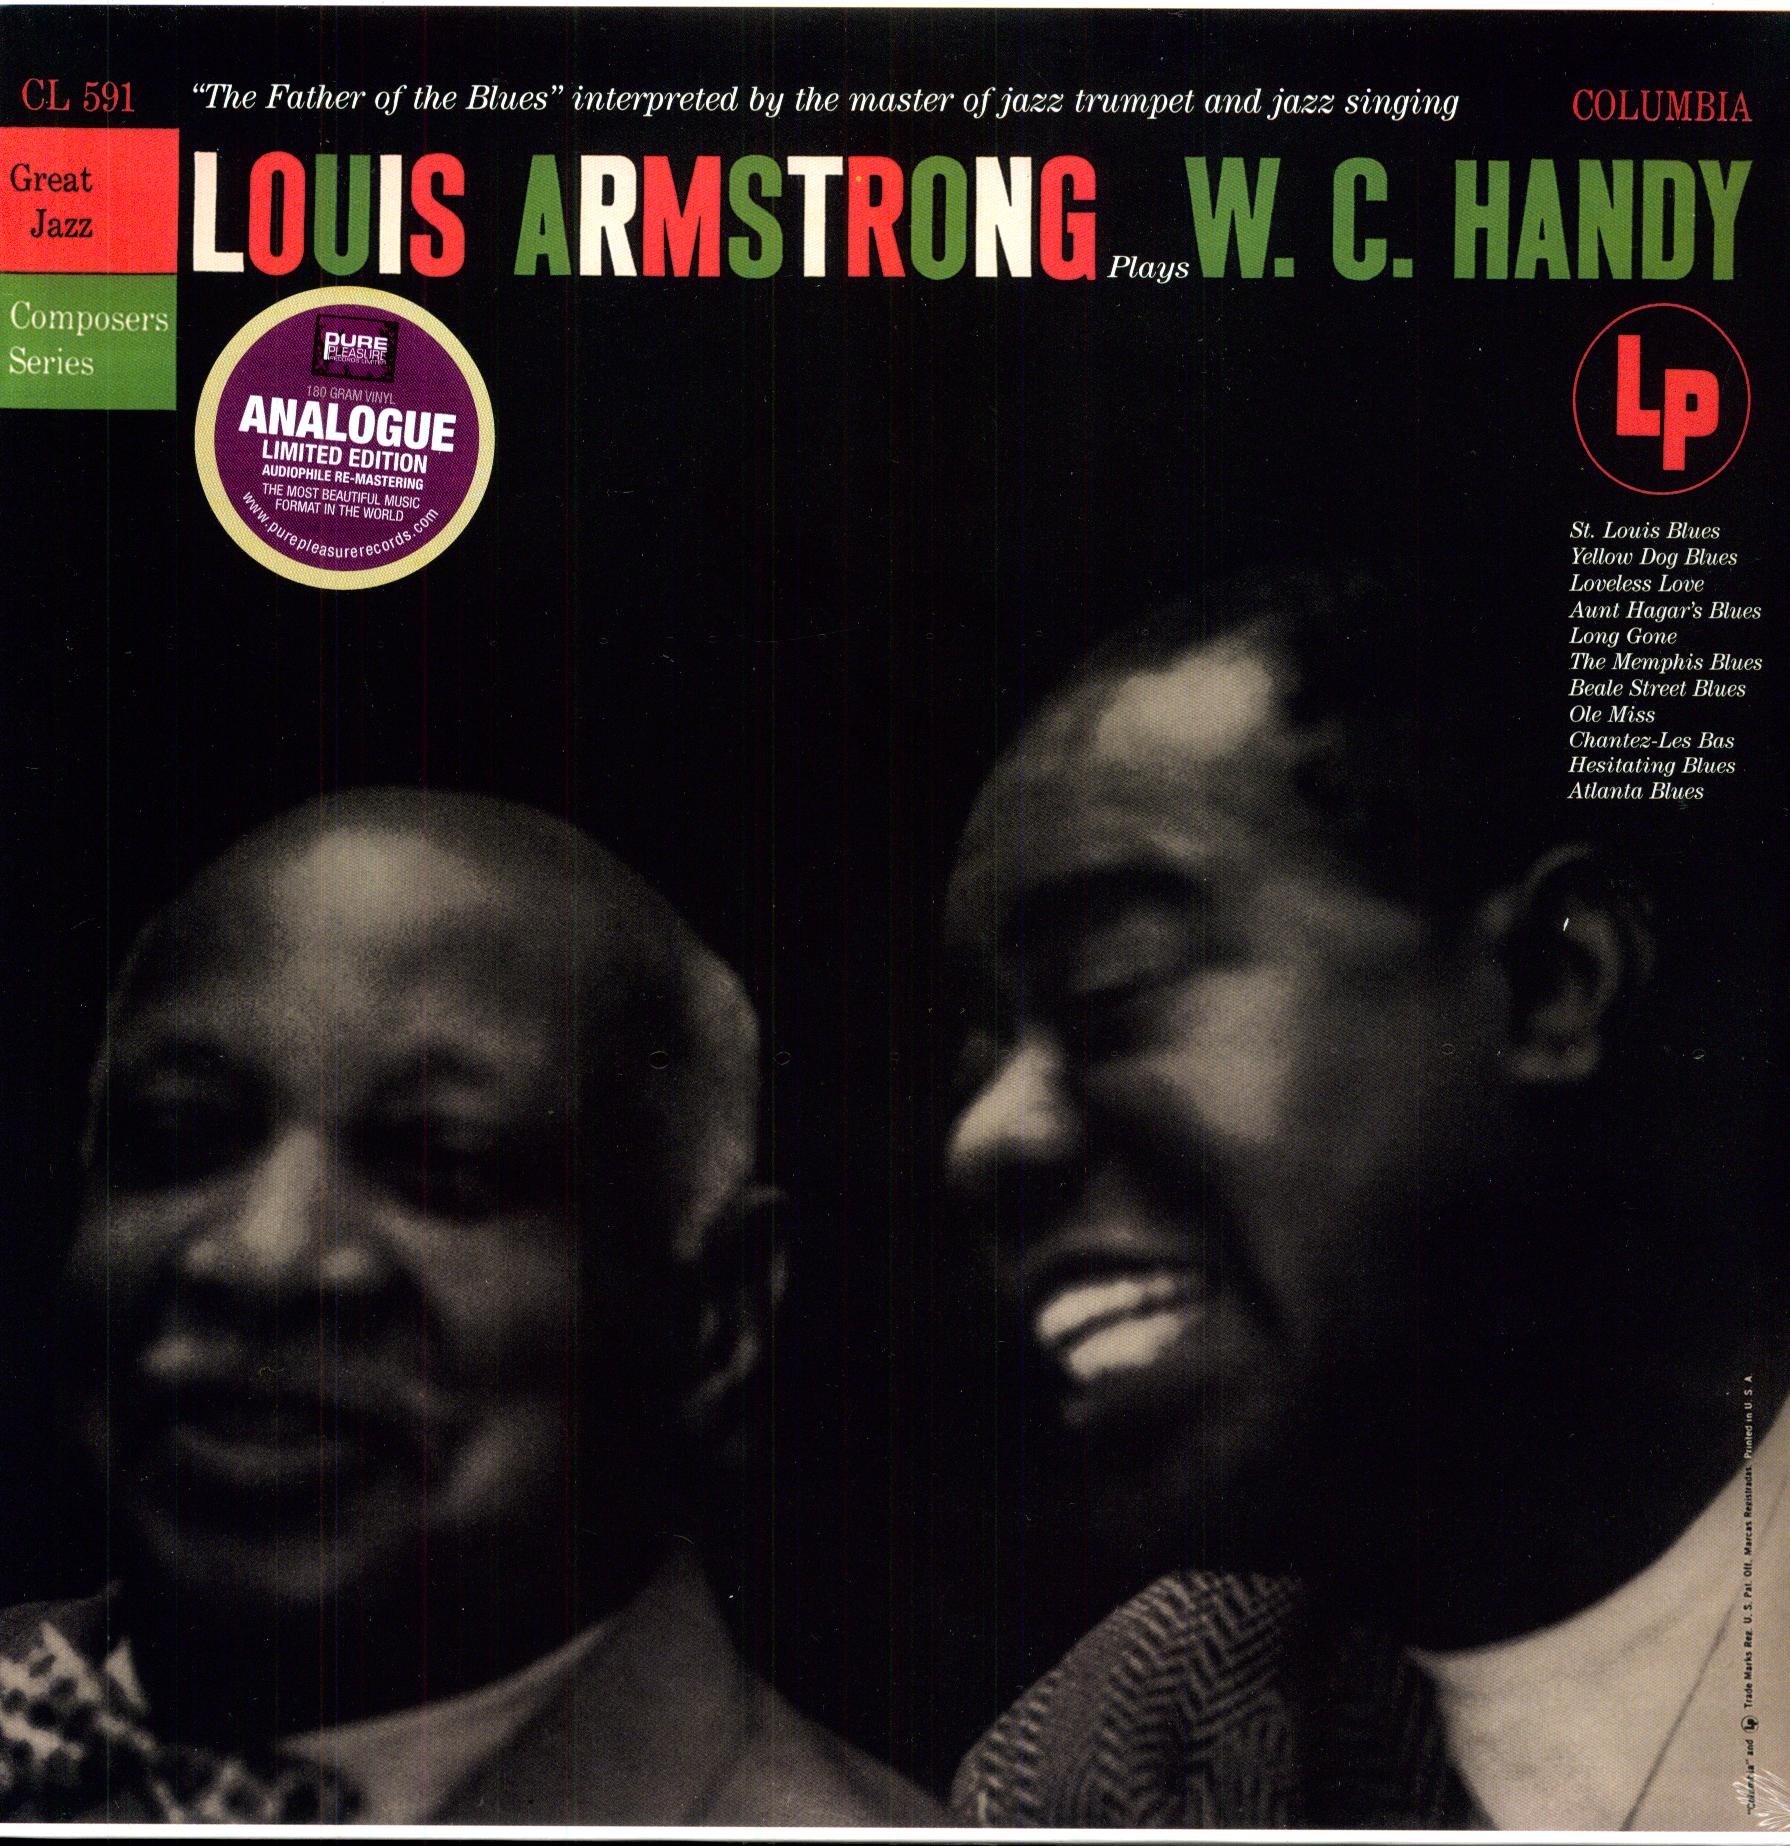 LOUIS ARMSTRONG PLAYS WC HANDY (OGV)